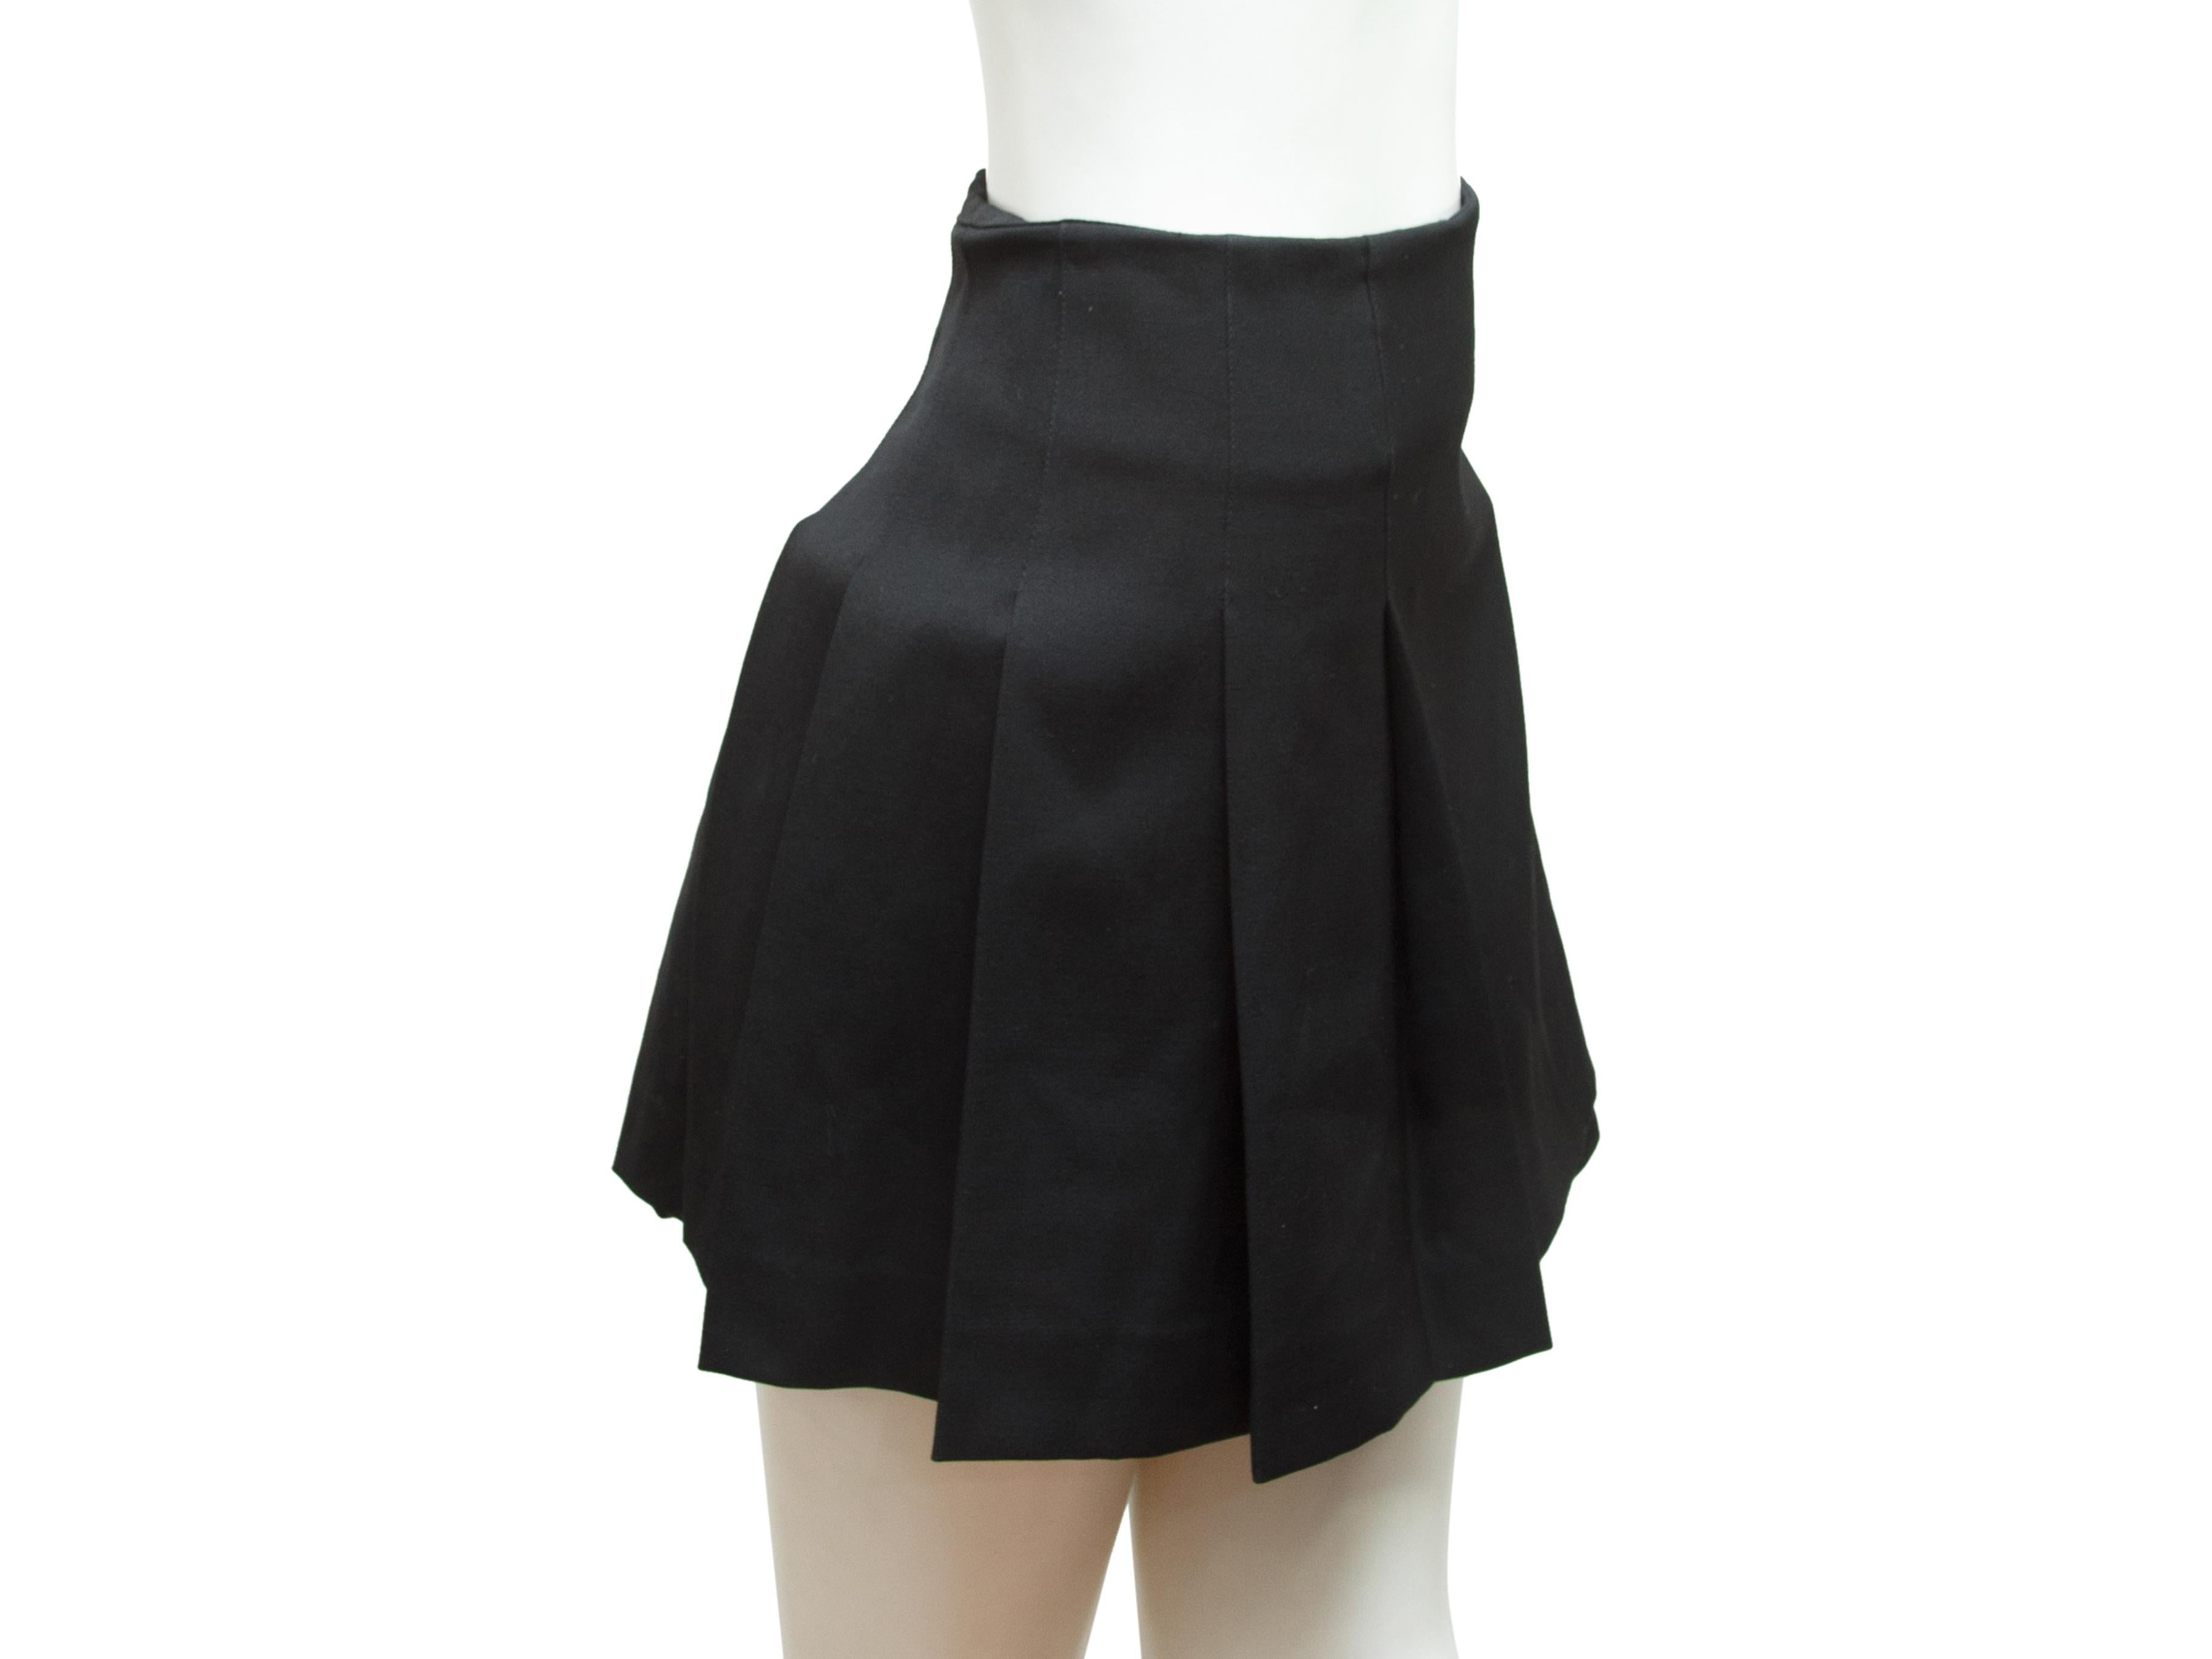 Product details:  Black kilt skirt by Burberry London.  Side double buckle closure.  Pleated back.  Frayed trim.  30